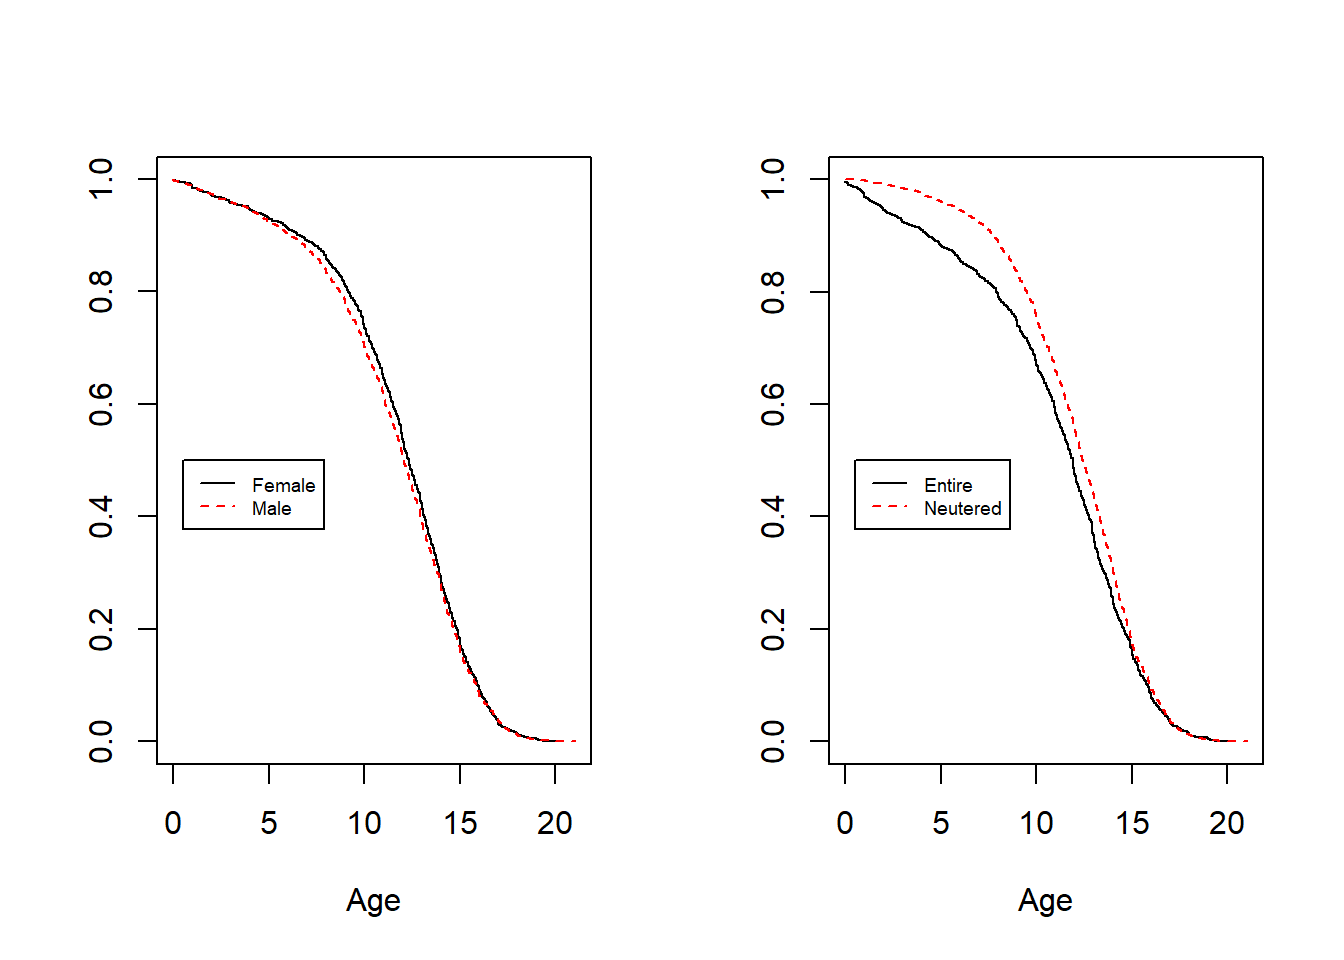 Survival Distributions by Sex and Being Neutered